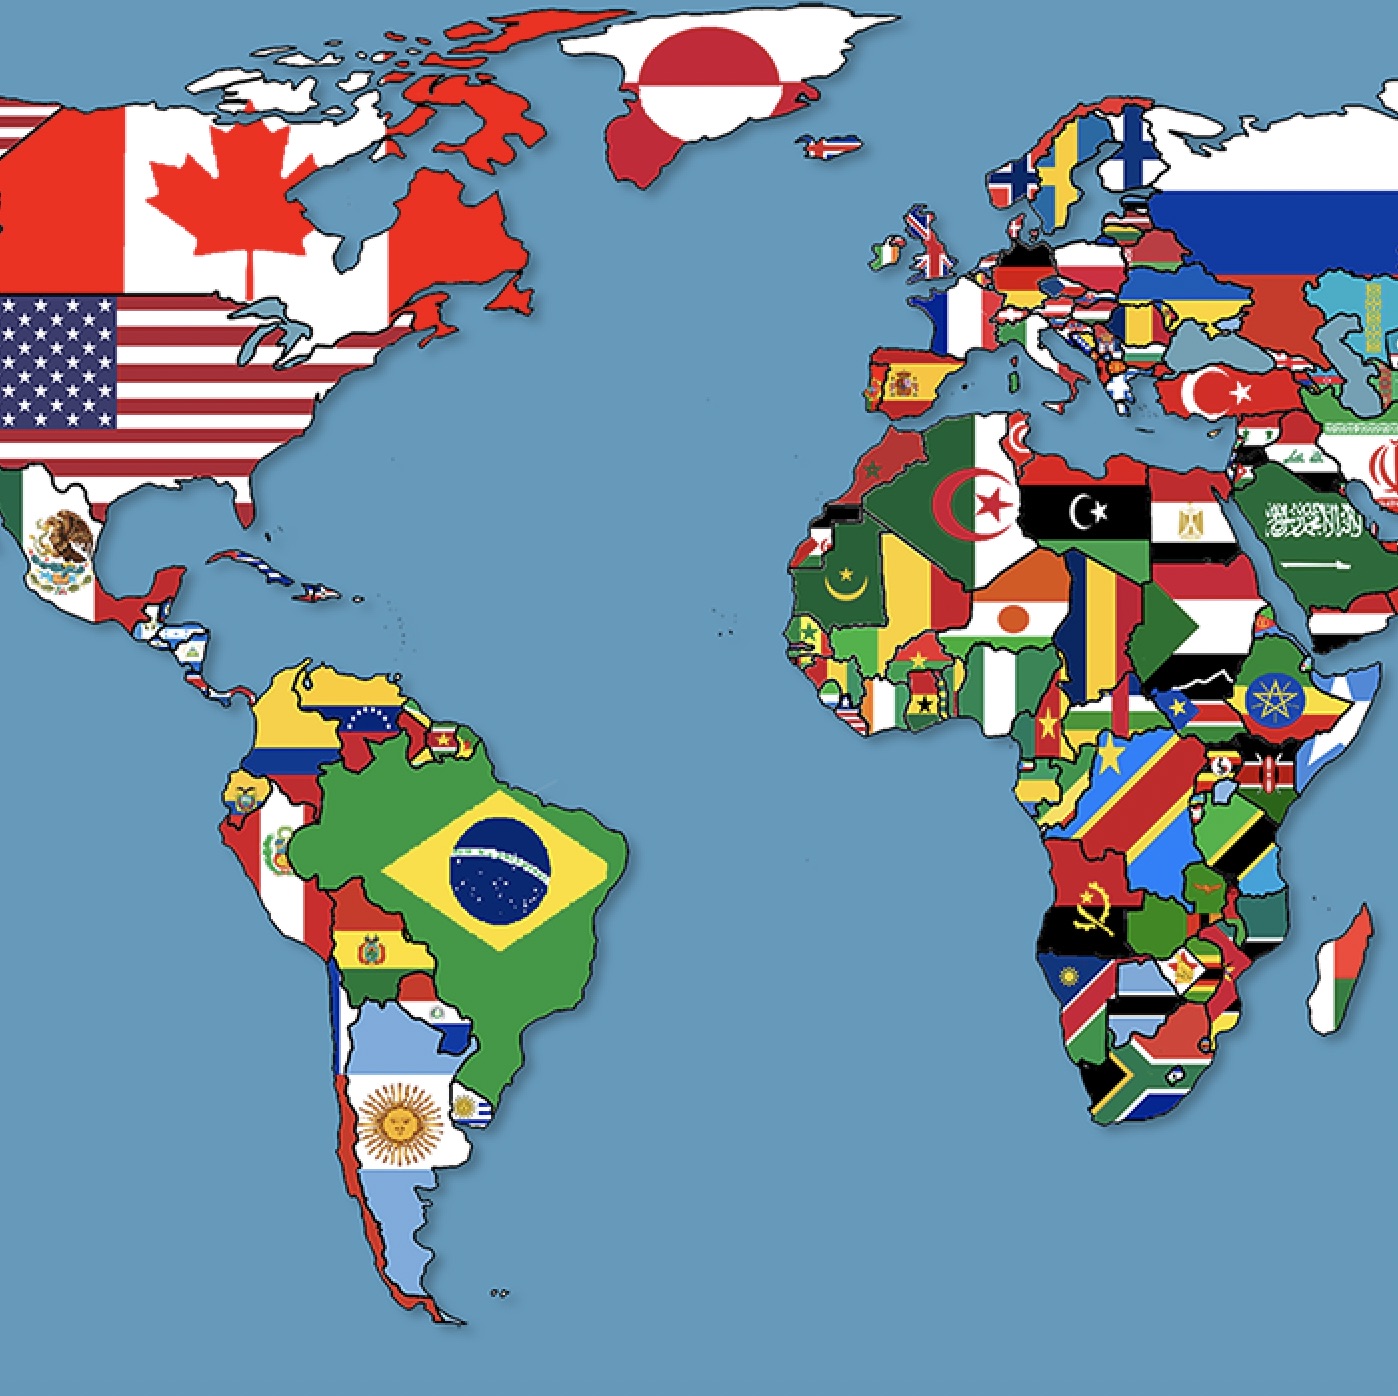 World map of countries' flags